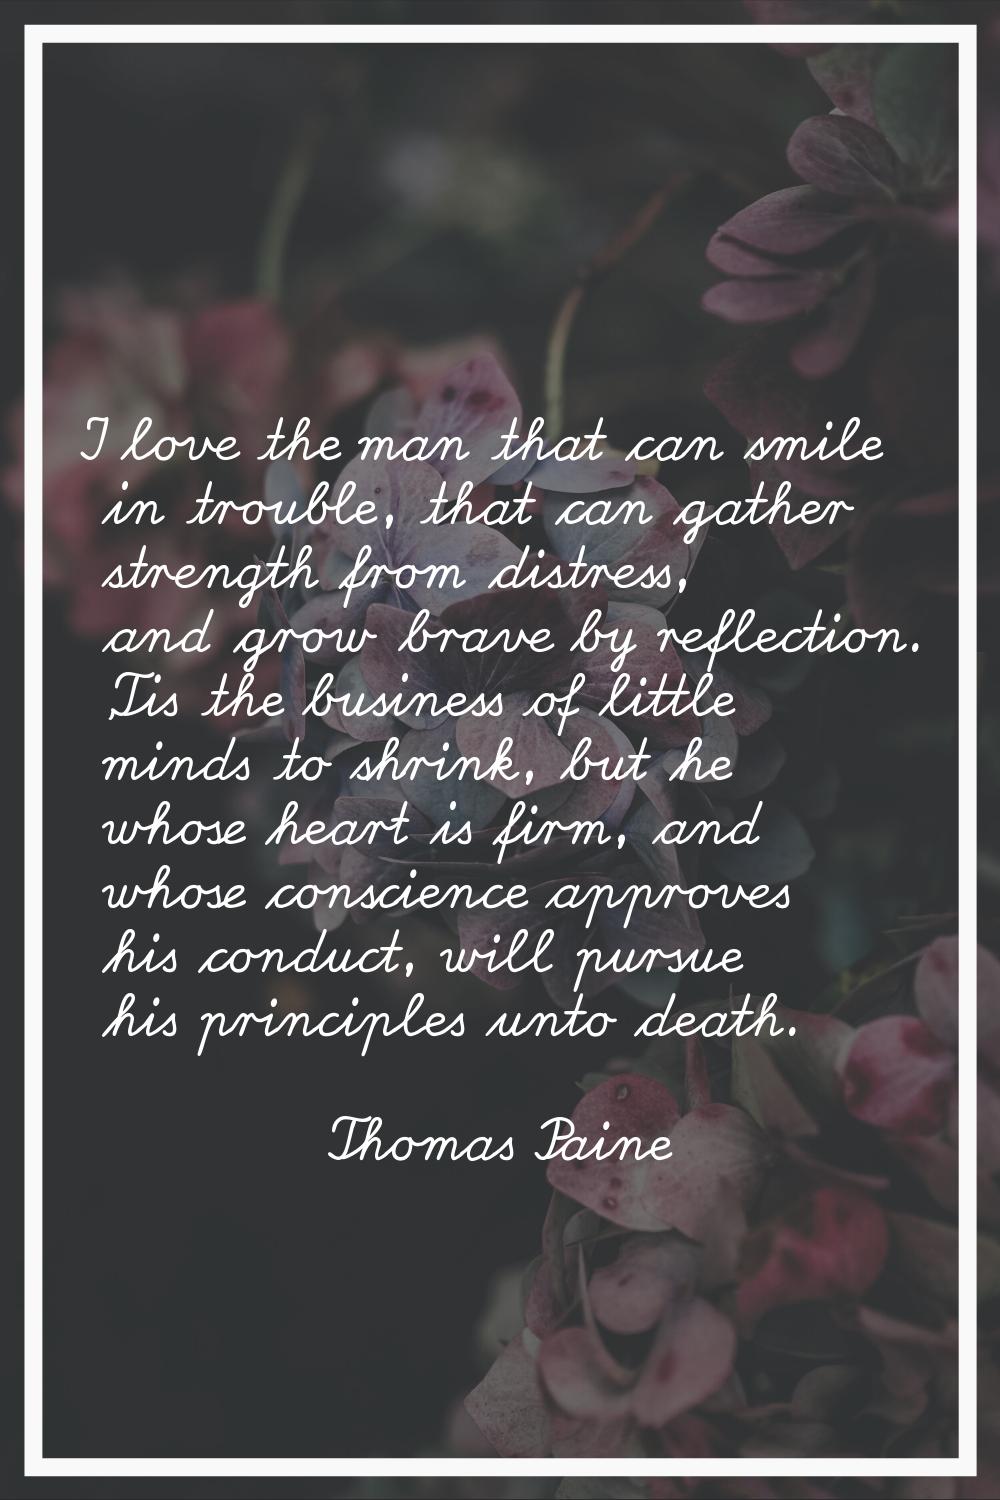 I love the man that can smile in trouble, that can gather strength from distress, and grow brave by